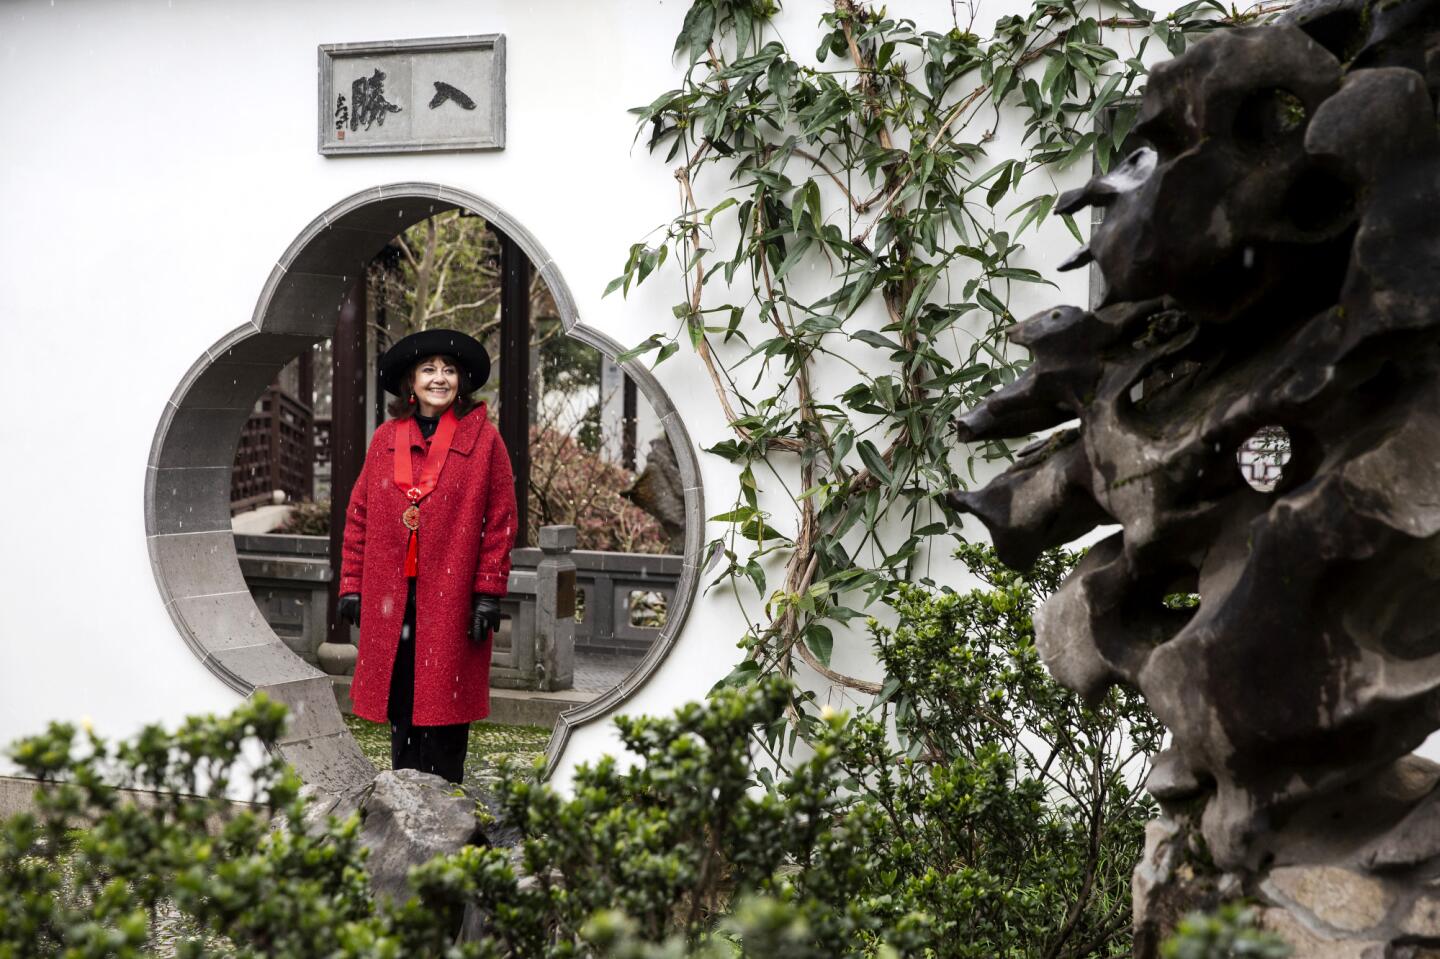 Lucinda Pierpont, a tour guide since the Lan Su Chinese Garden opened 20 years ago, poses in the garden.